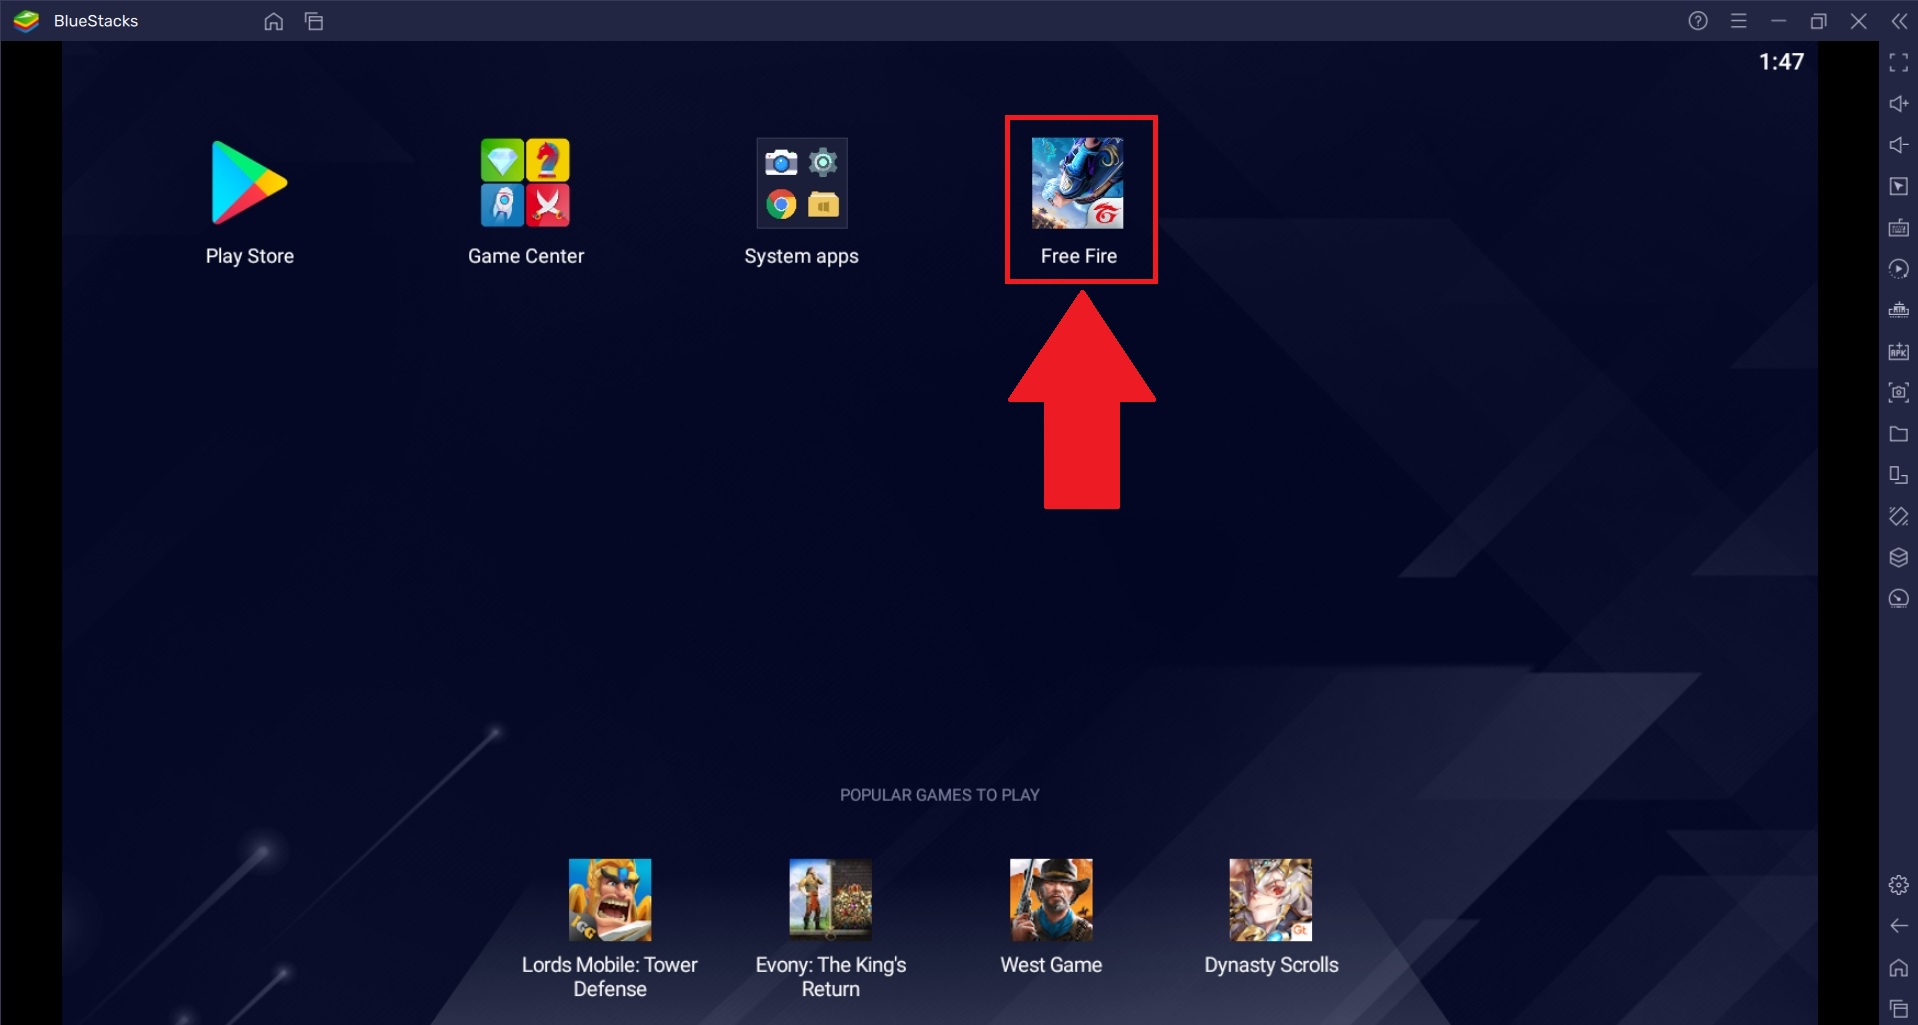 How To Create Desktop Shortcuts For Your Apps On Bluestacks 5 Bluestacks Support